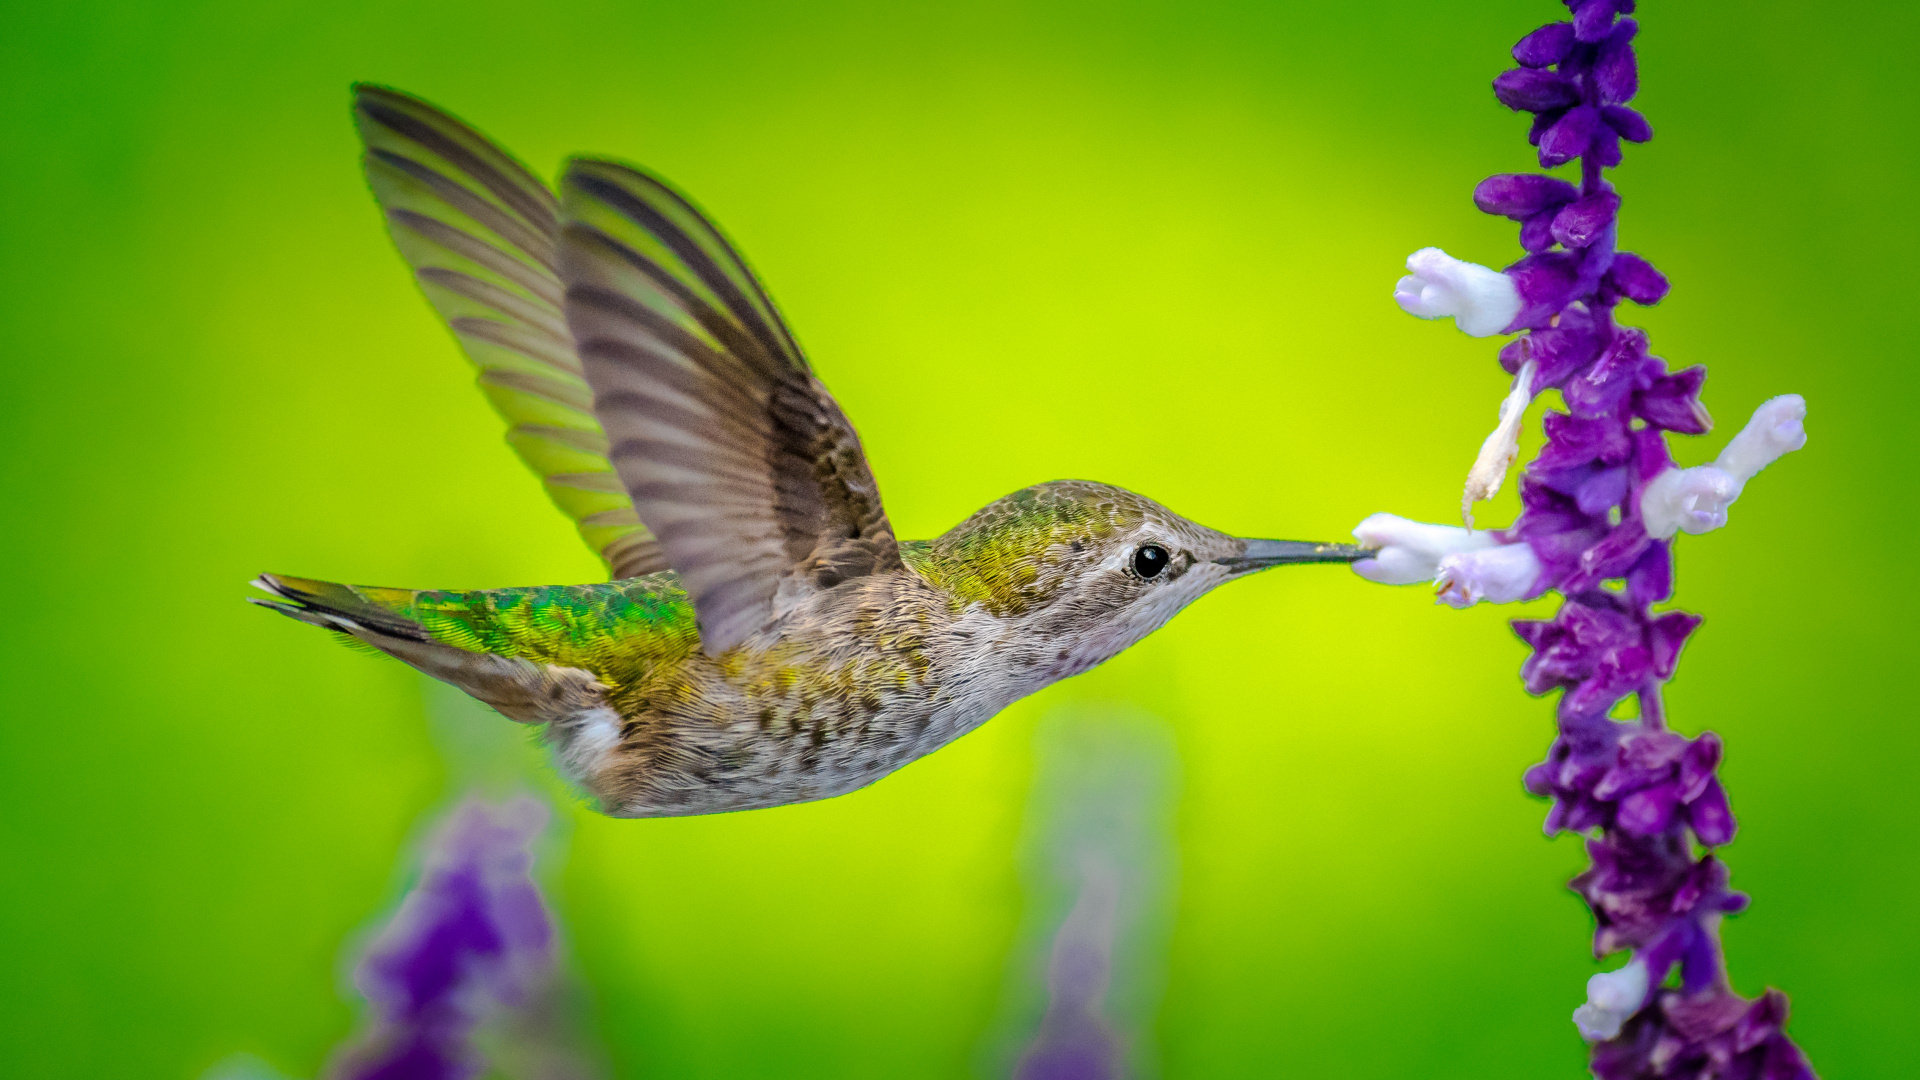 Green and White Humming Bird Flying. Wallpaper in 1920x1080 Resolution